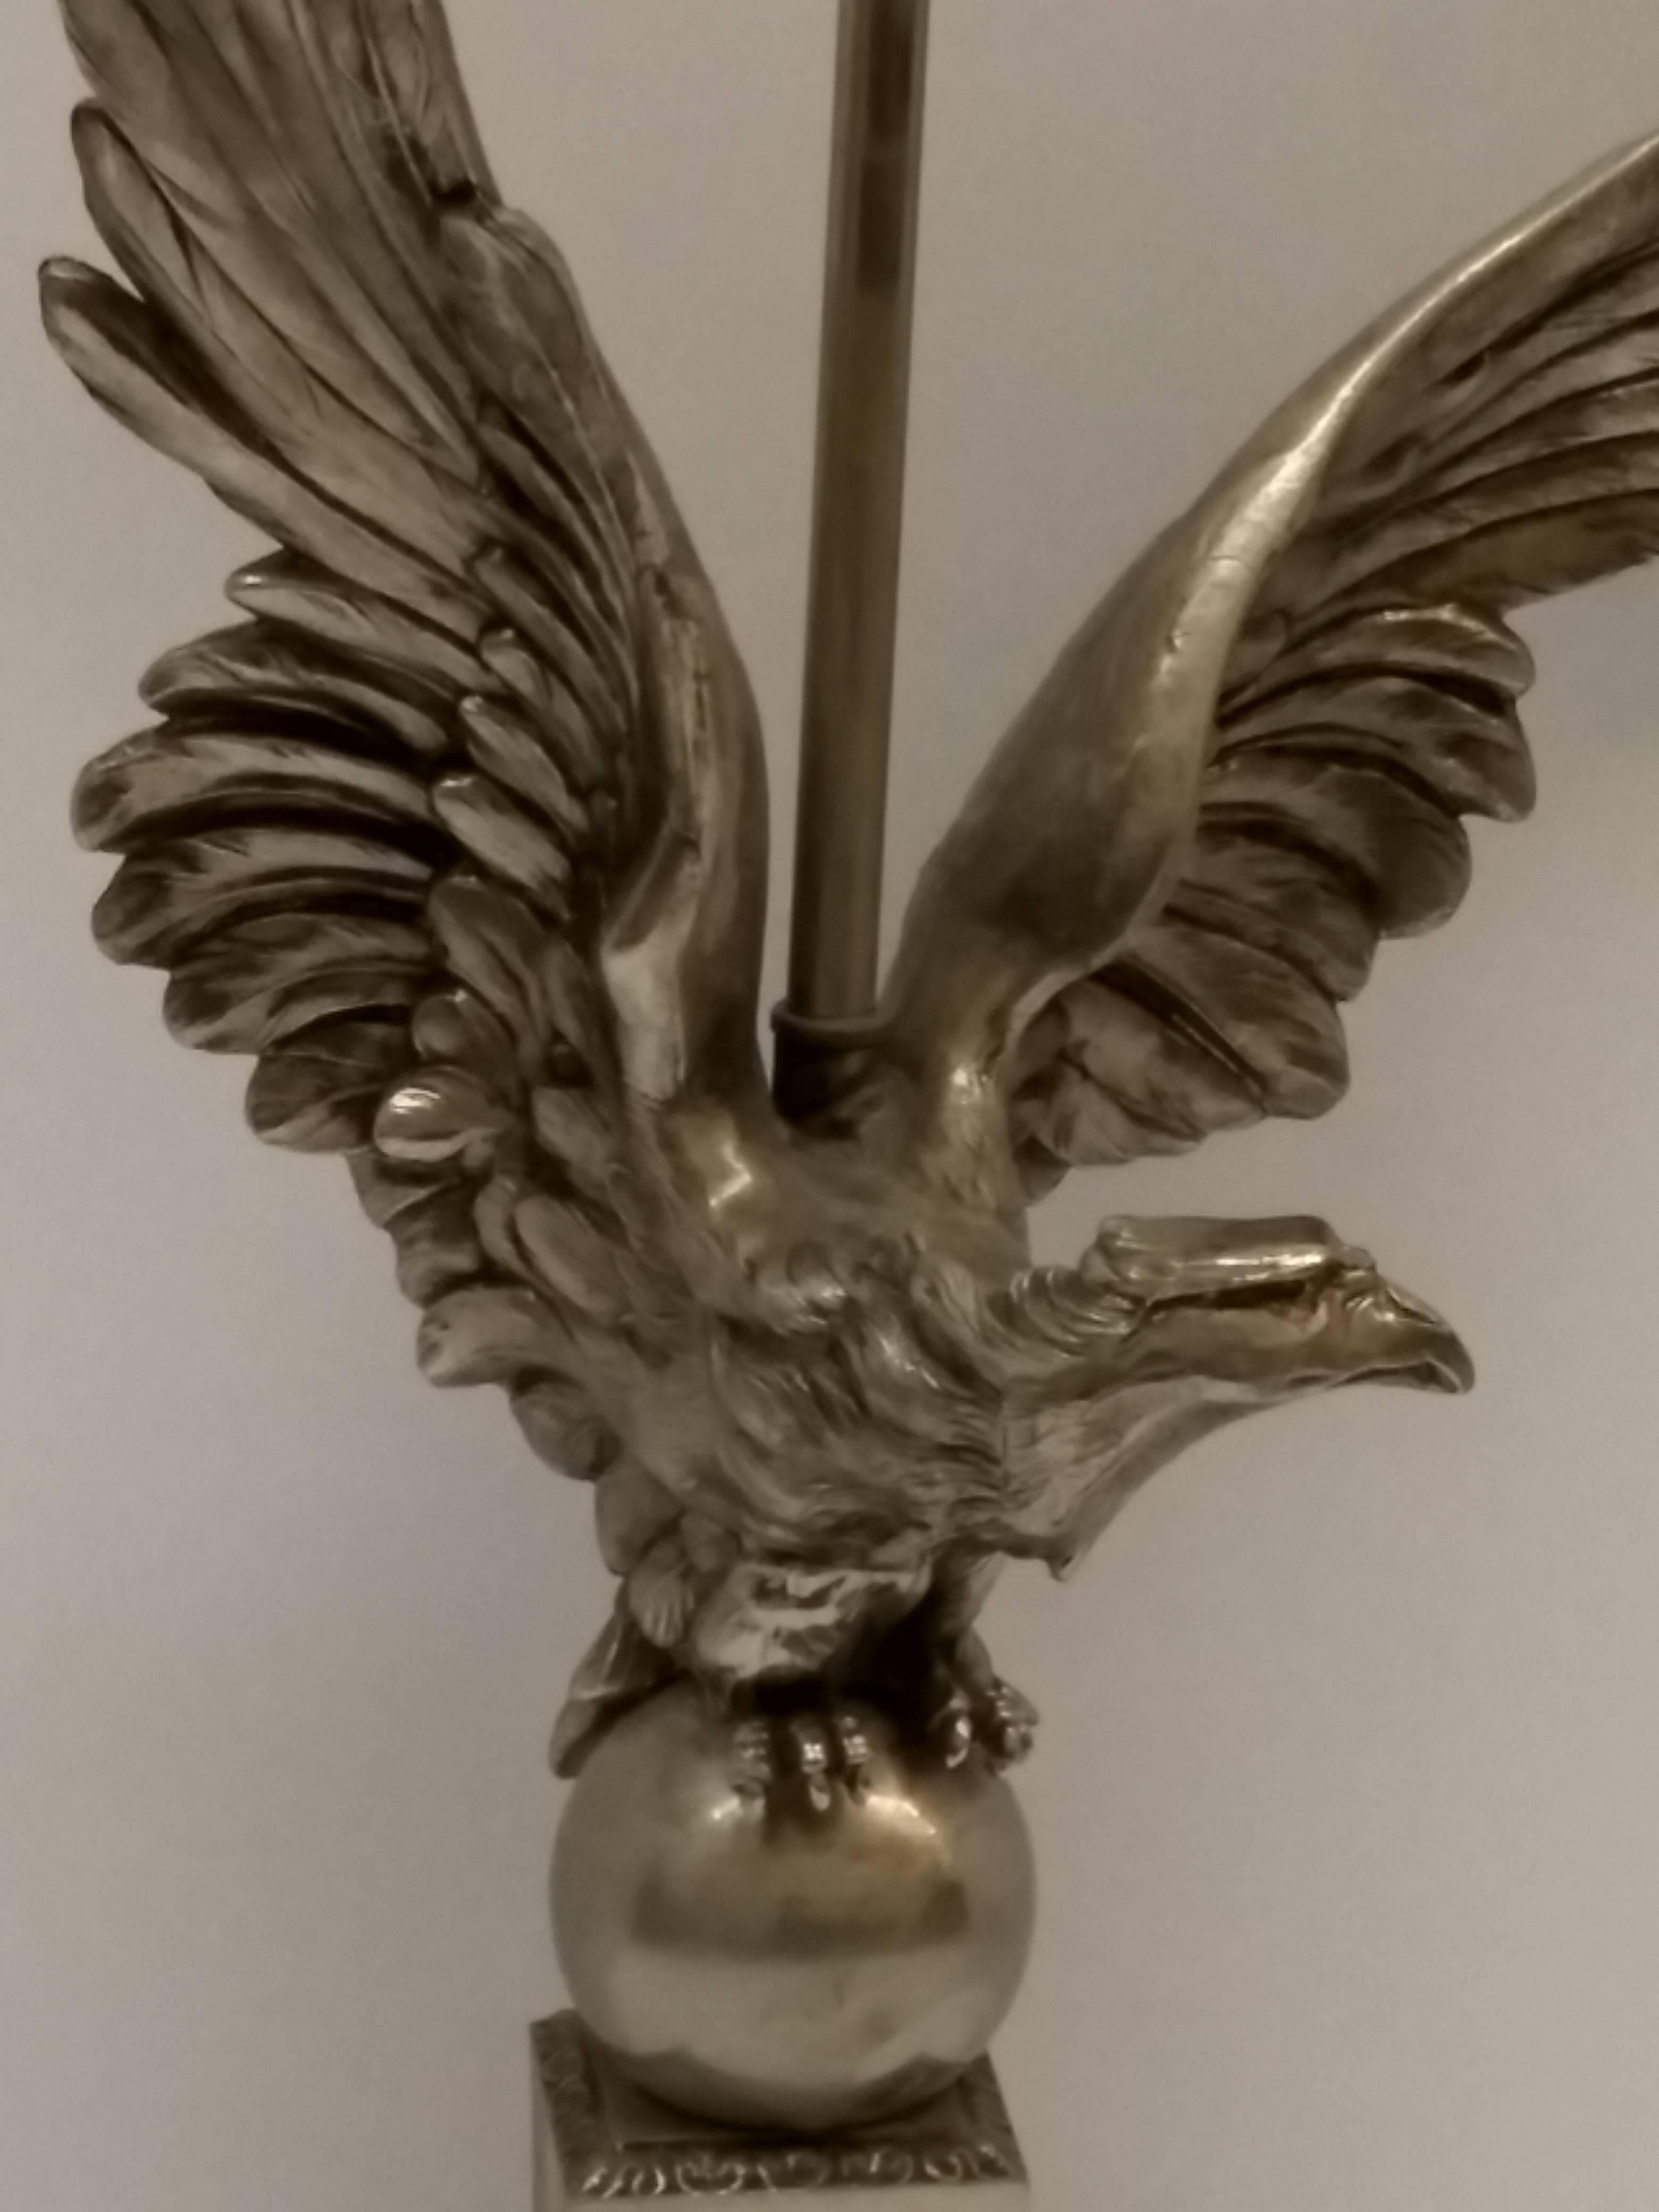 eagle lamps for sale